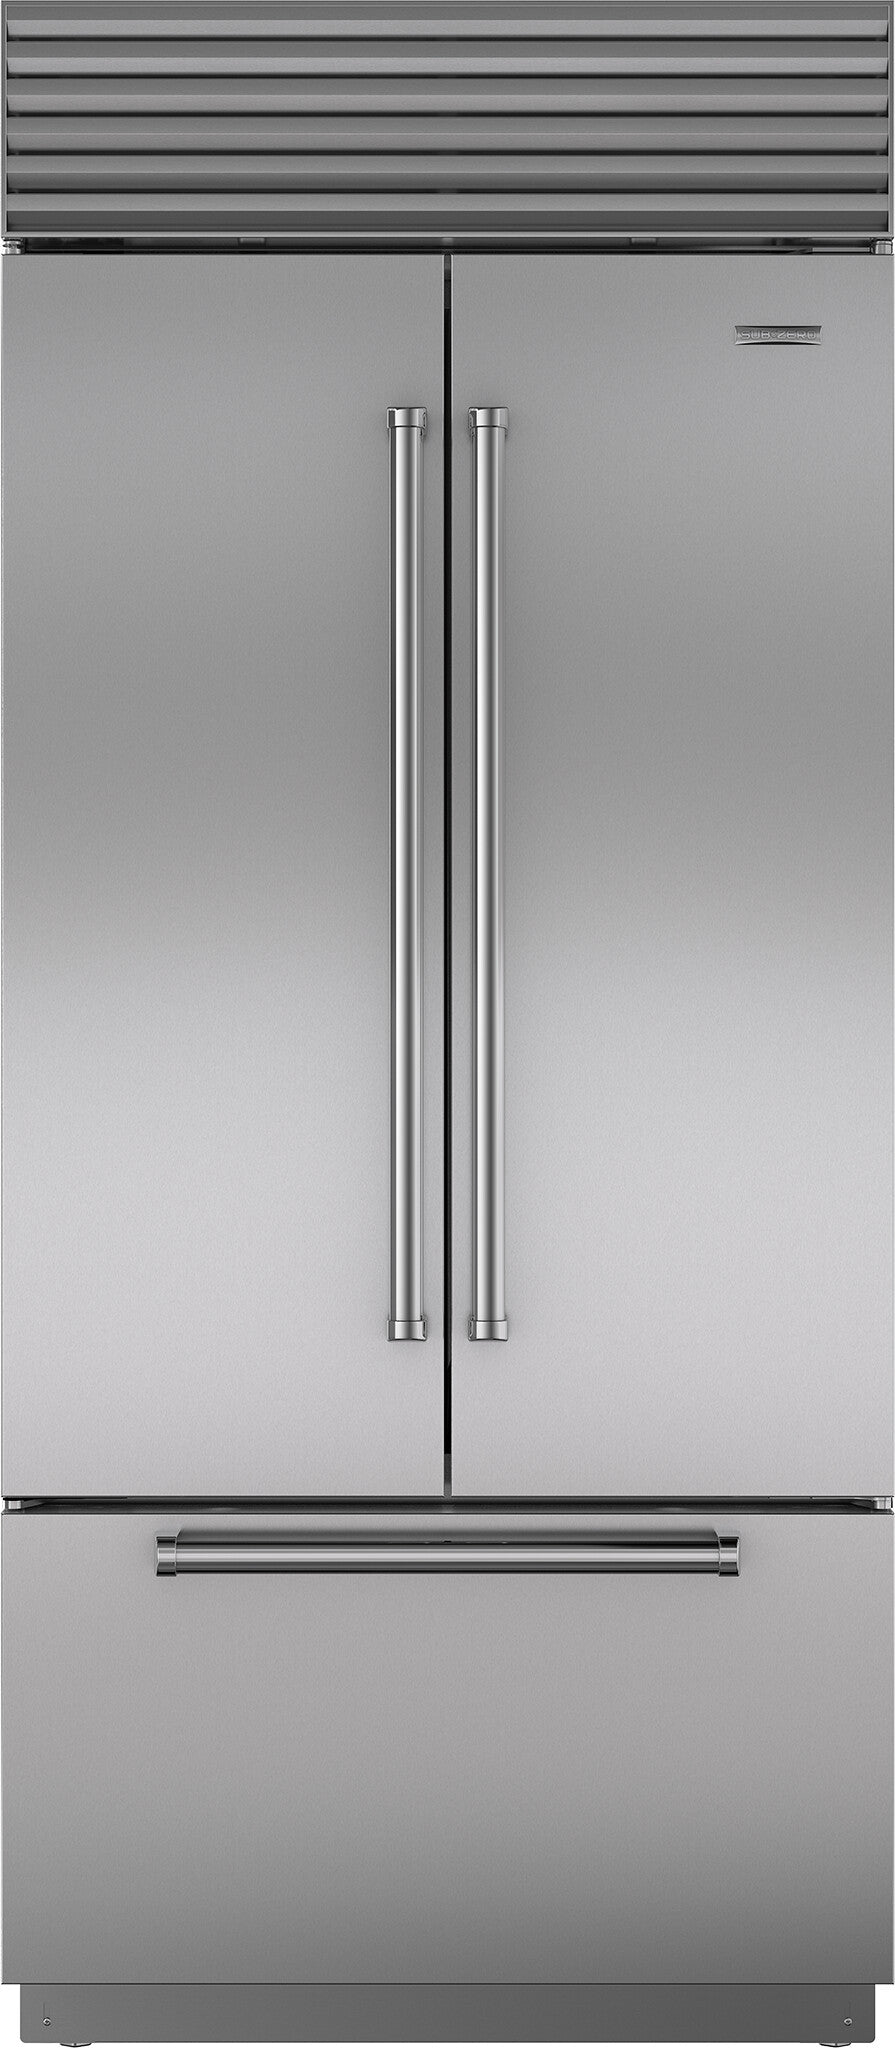 Sub-Zero - 36 Inch 21 cu. ft Built In / Integrated French Door Refrigerator in Stainless - CL3650UFDID/S/T